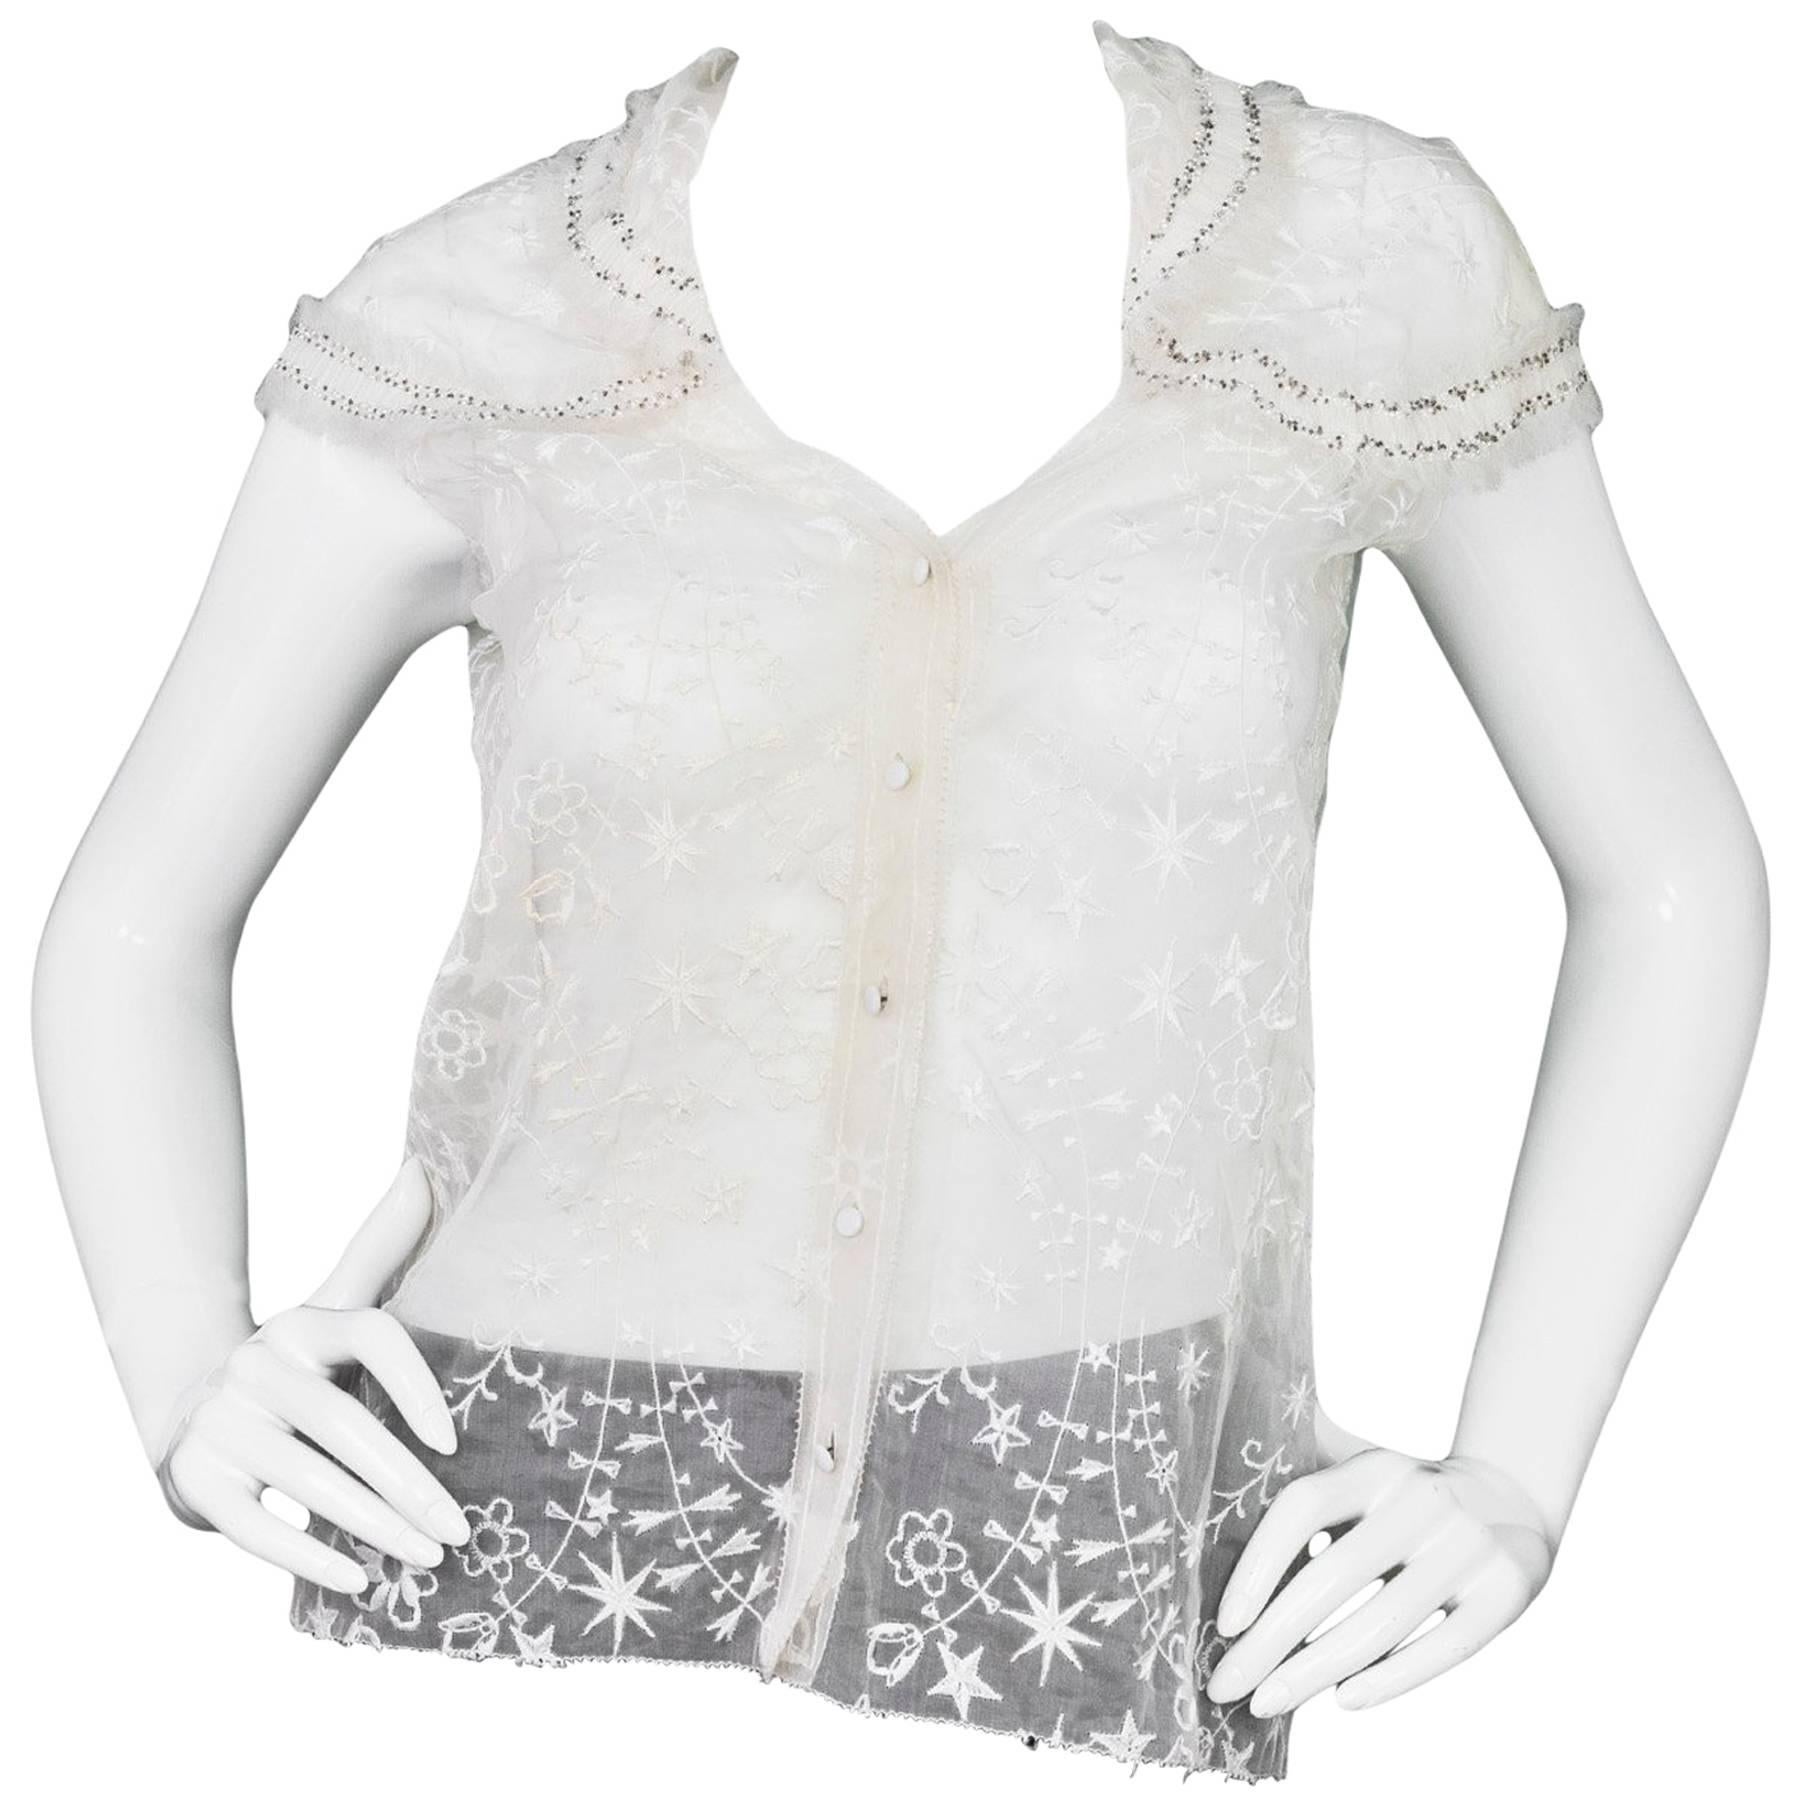 Nina Ricci White Embroidered Silk Cap Sleeve Top
Features beading and fringe throughout neckline and sleeves

Made In: France
Color: White
Composition: 100% silk
Lining: None
Closure/Opening: Button up front
Exterior Pockets: None
Interior Pockets: